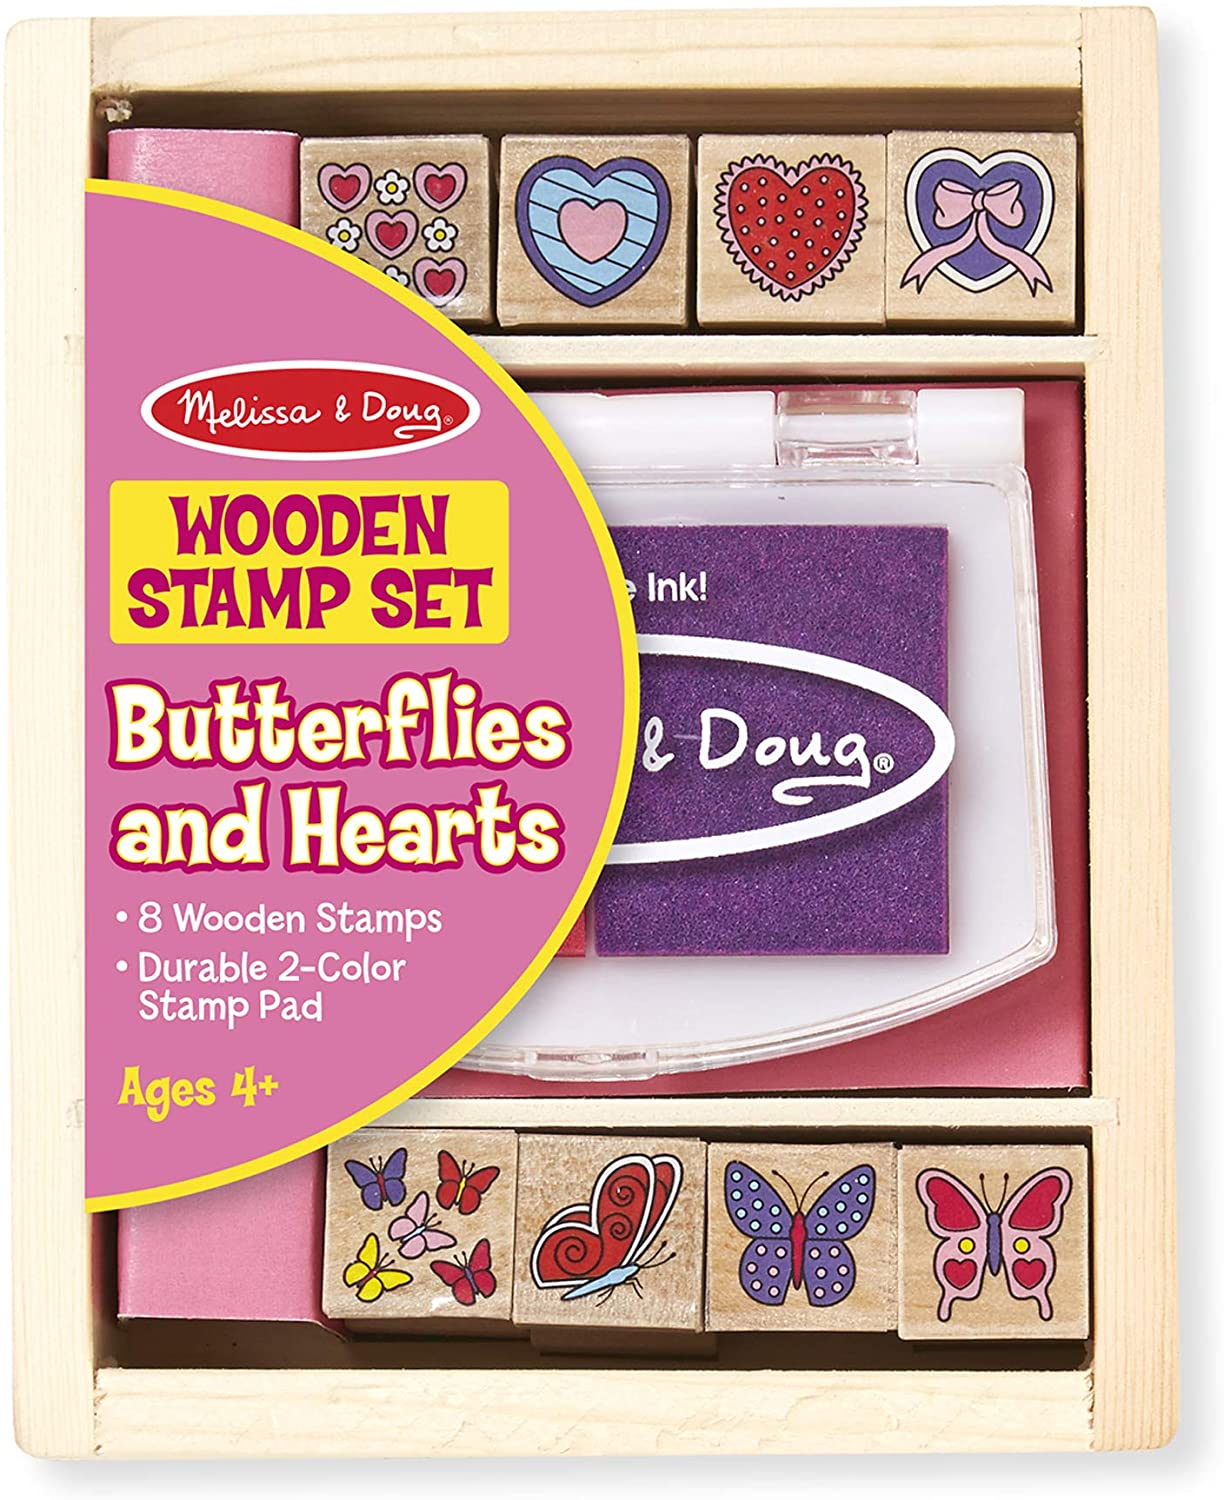 Butterflies and Hearts Wooden Stamp Set